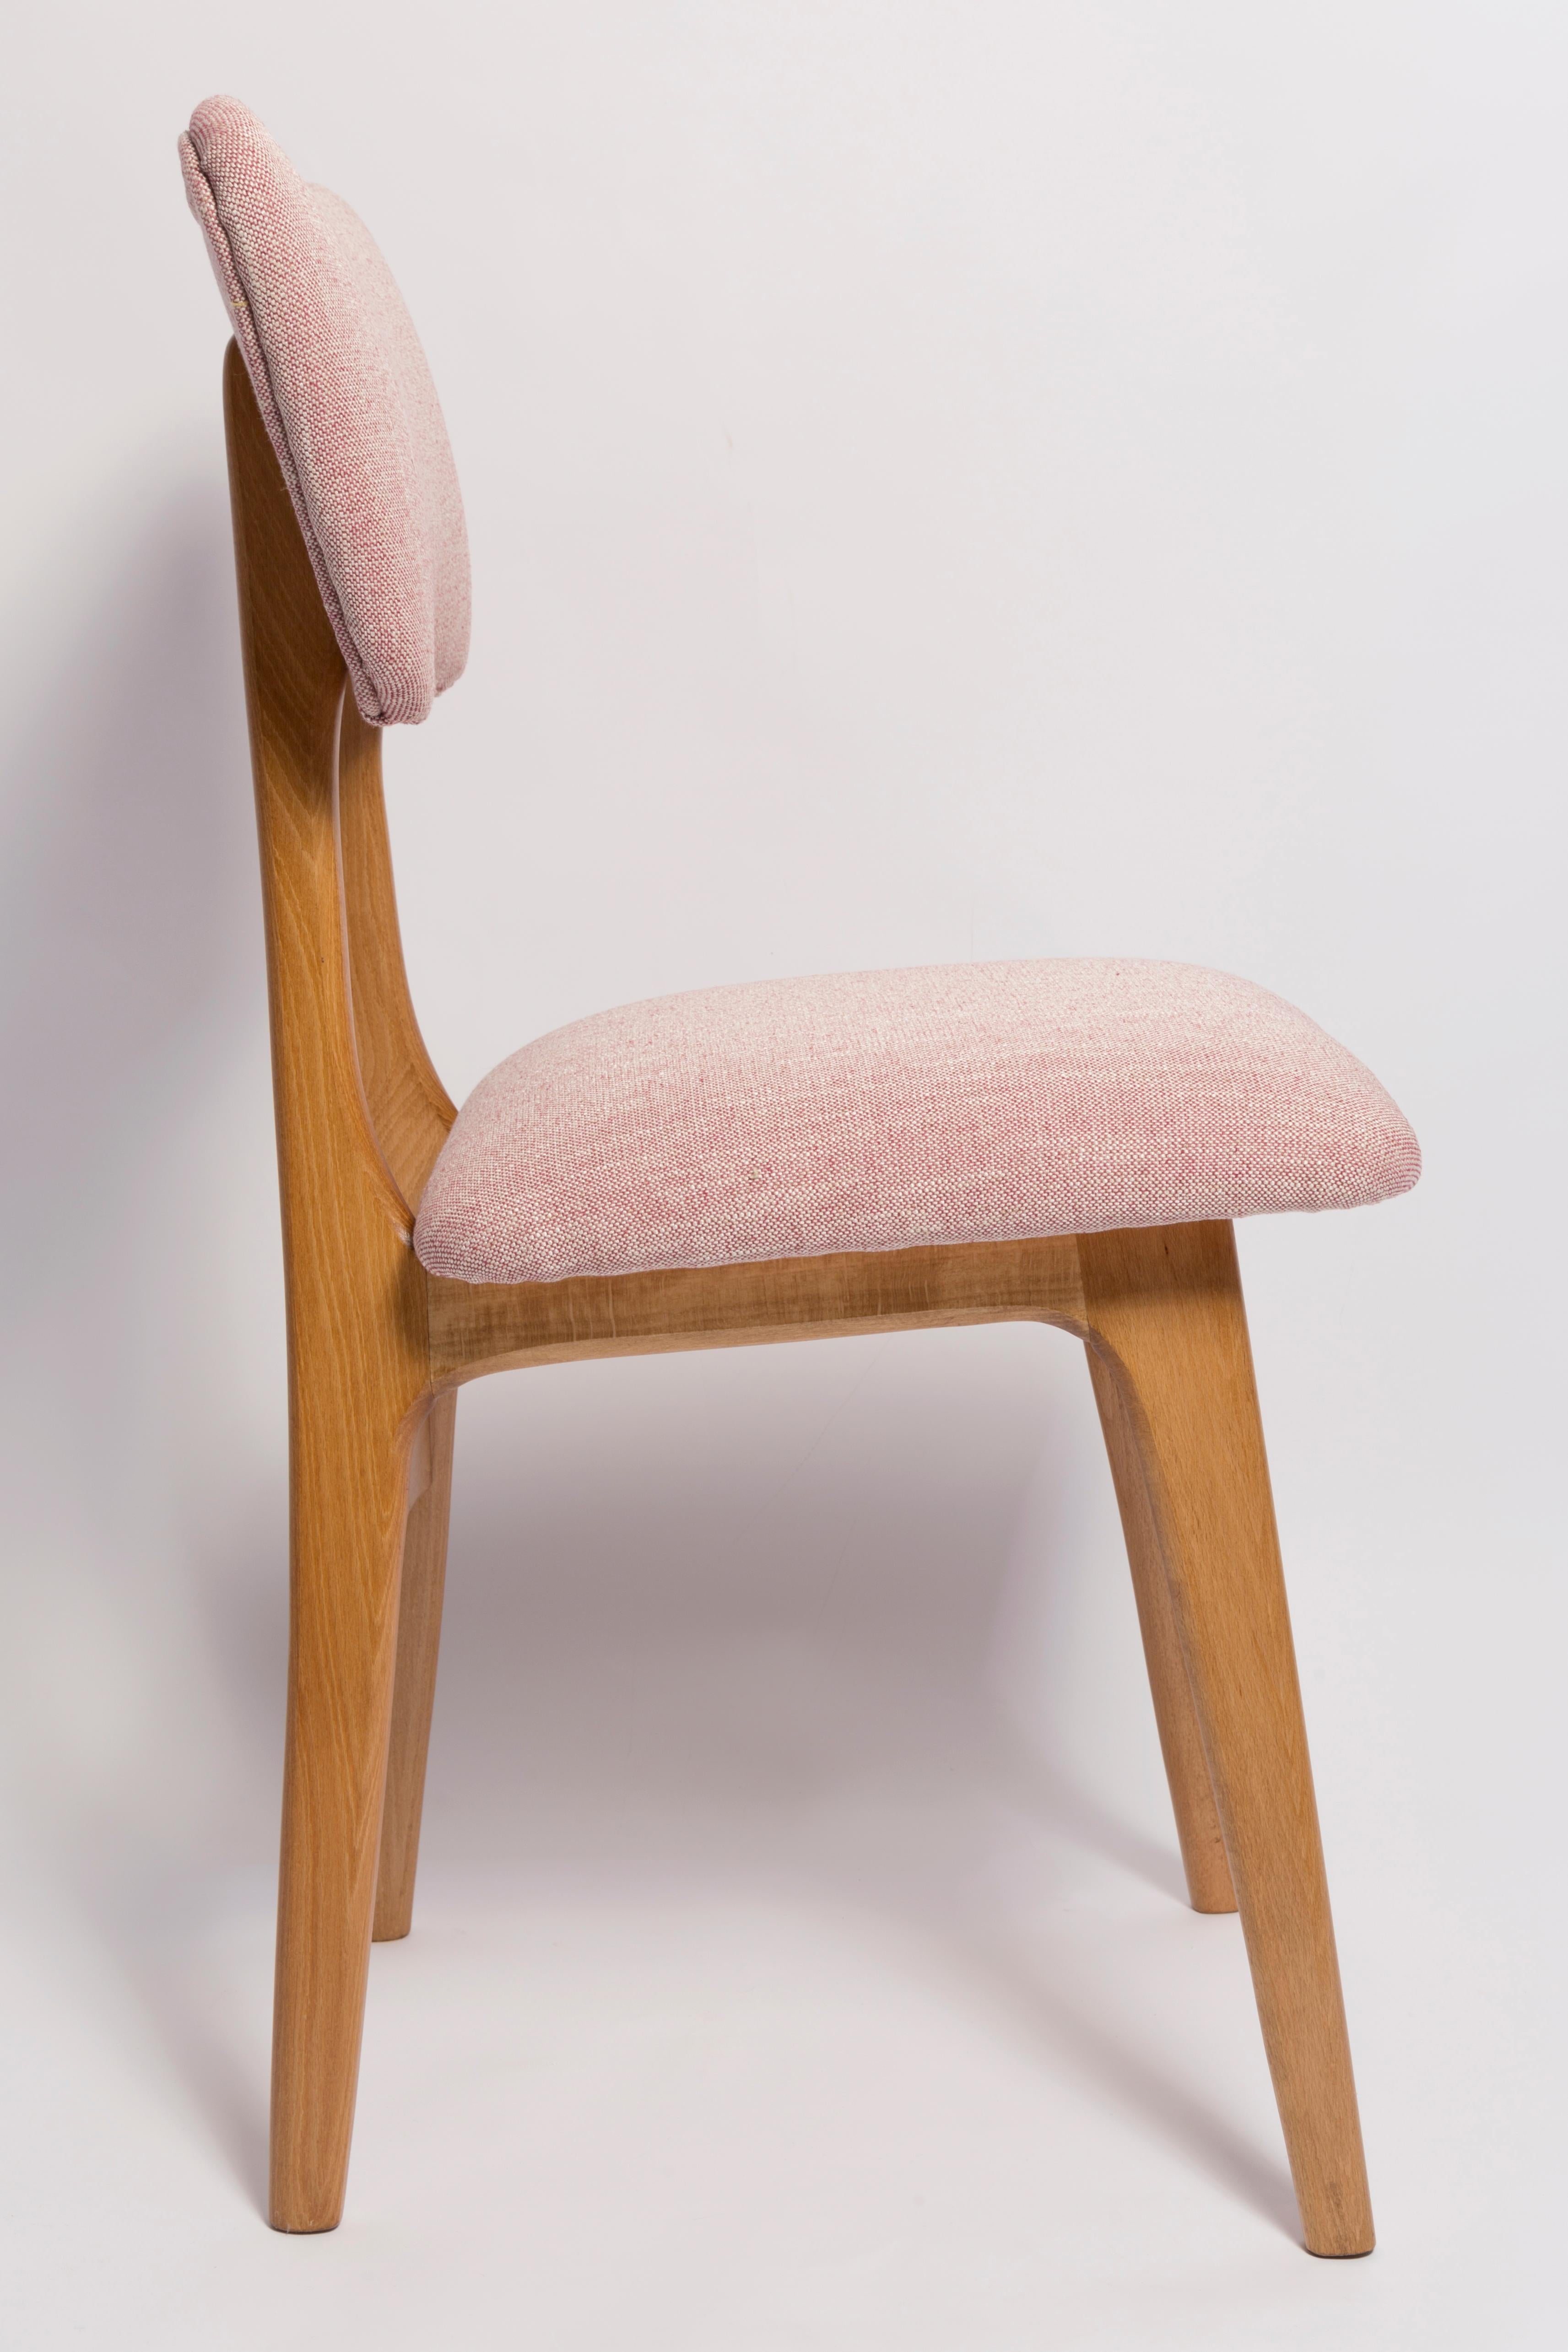 Hand-Crafted Mid Century Butterfly Dining Chair, Pink Linen, Light Wood, Europe, 1960s For Sale